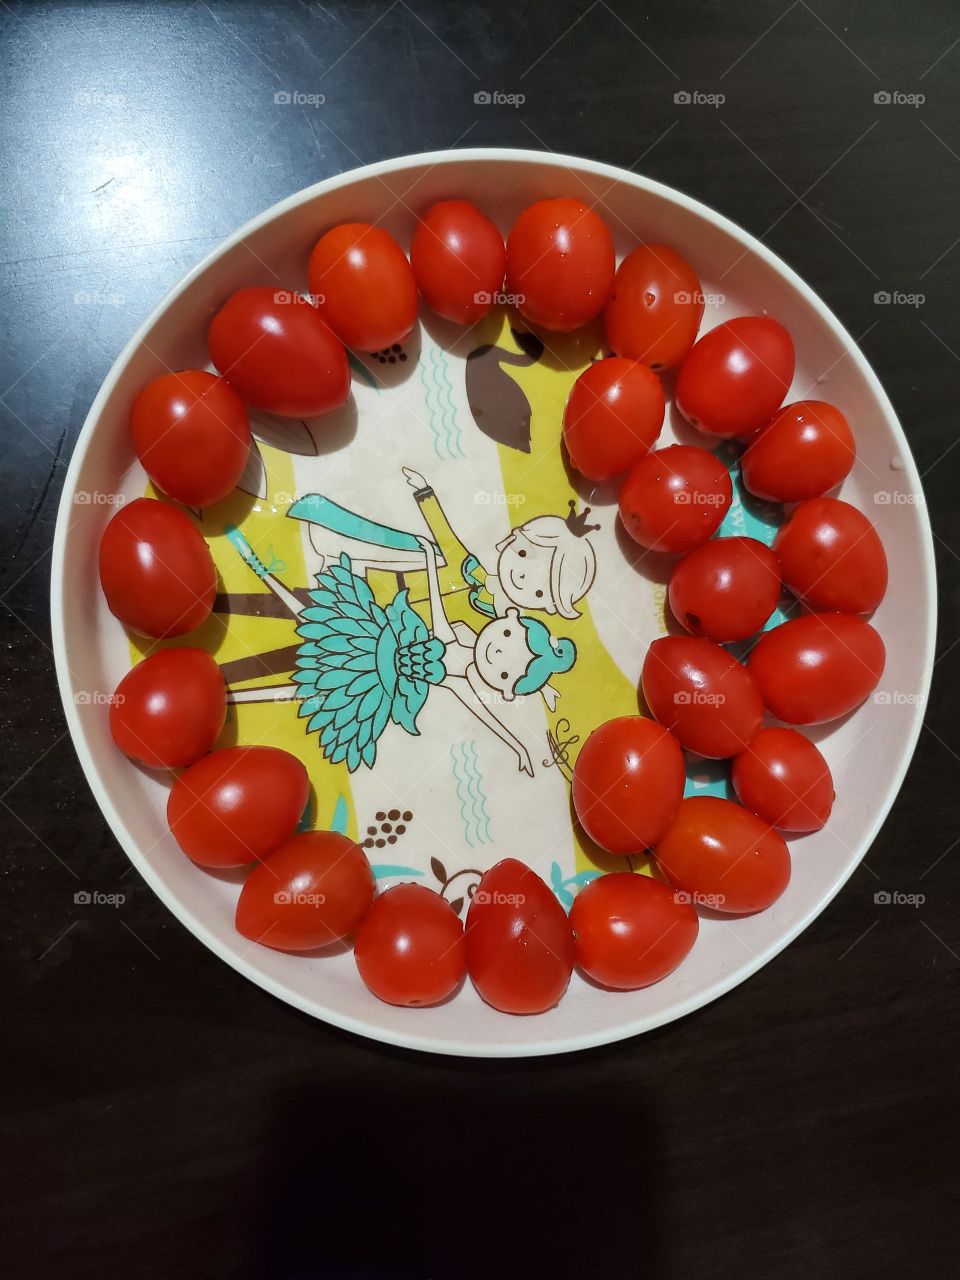 tomatoes lovers